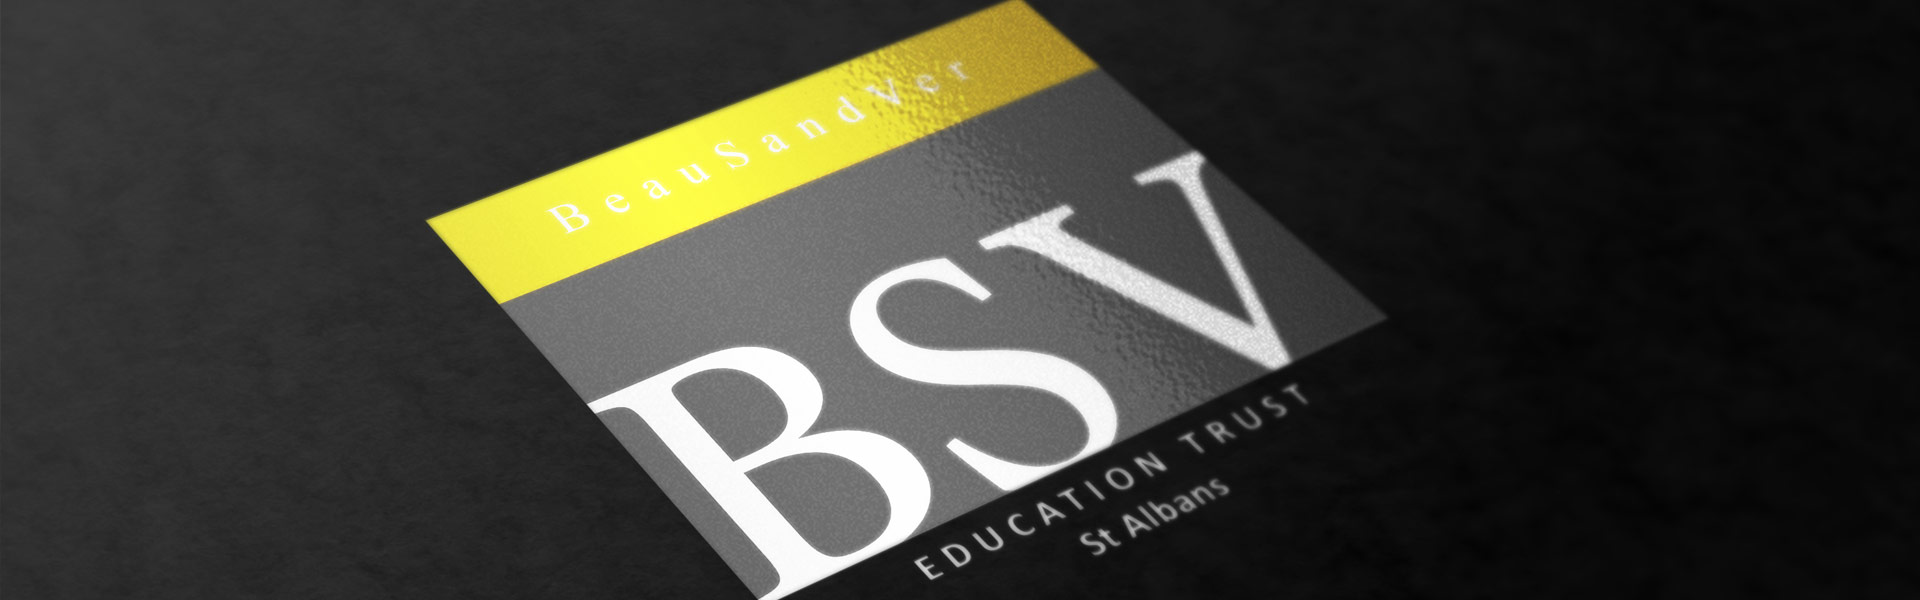 BSV logo in isometric view on black background.